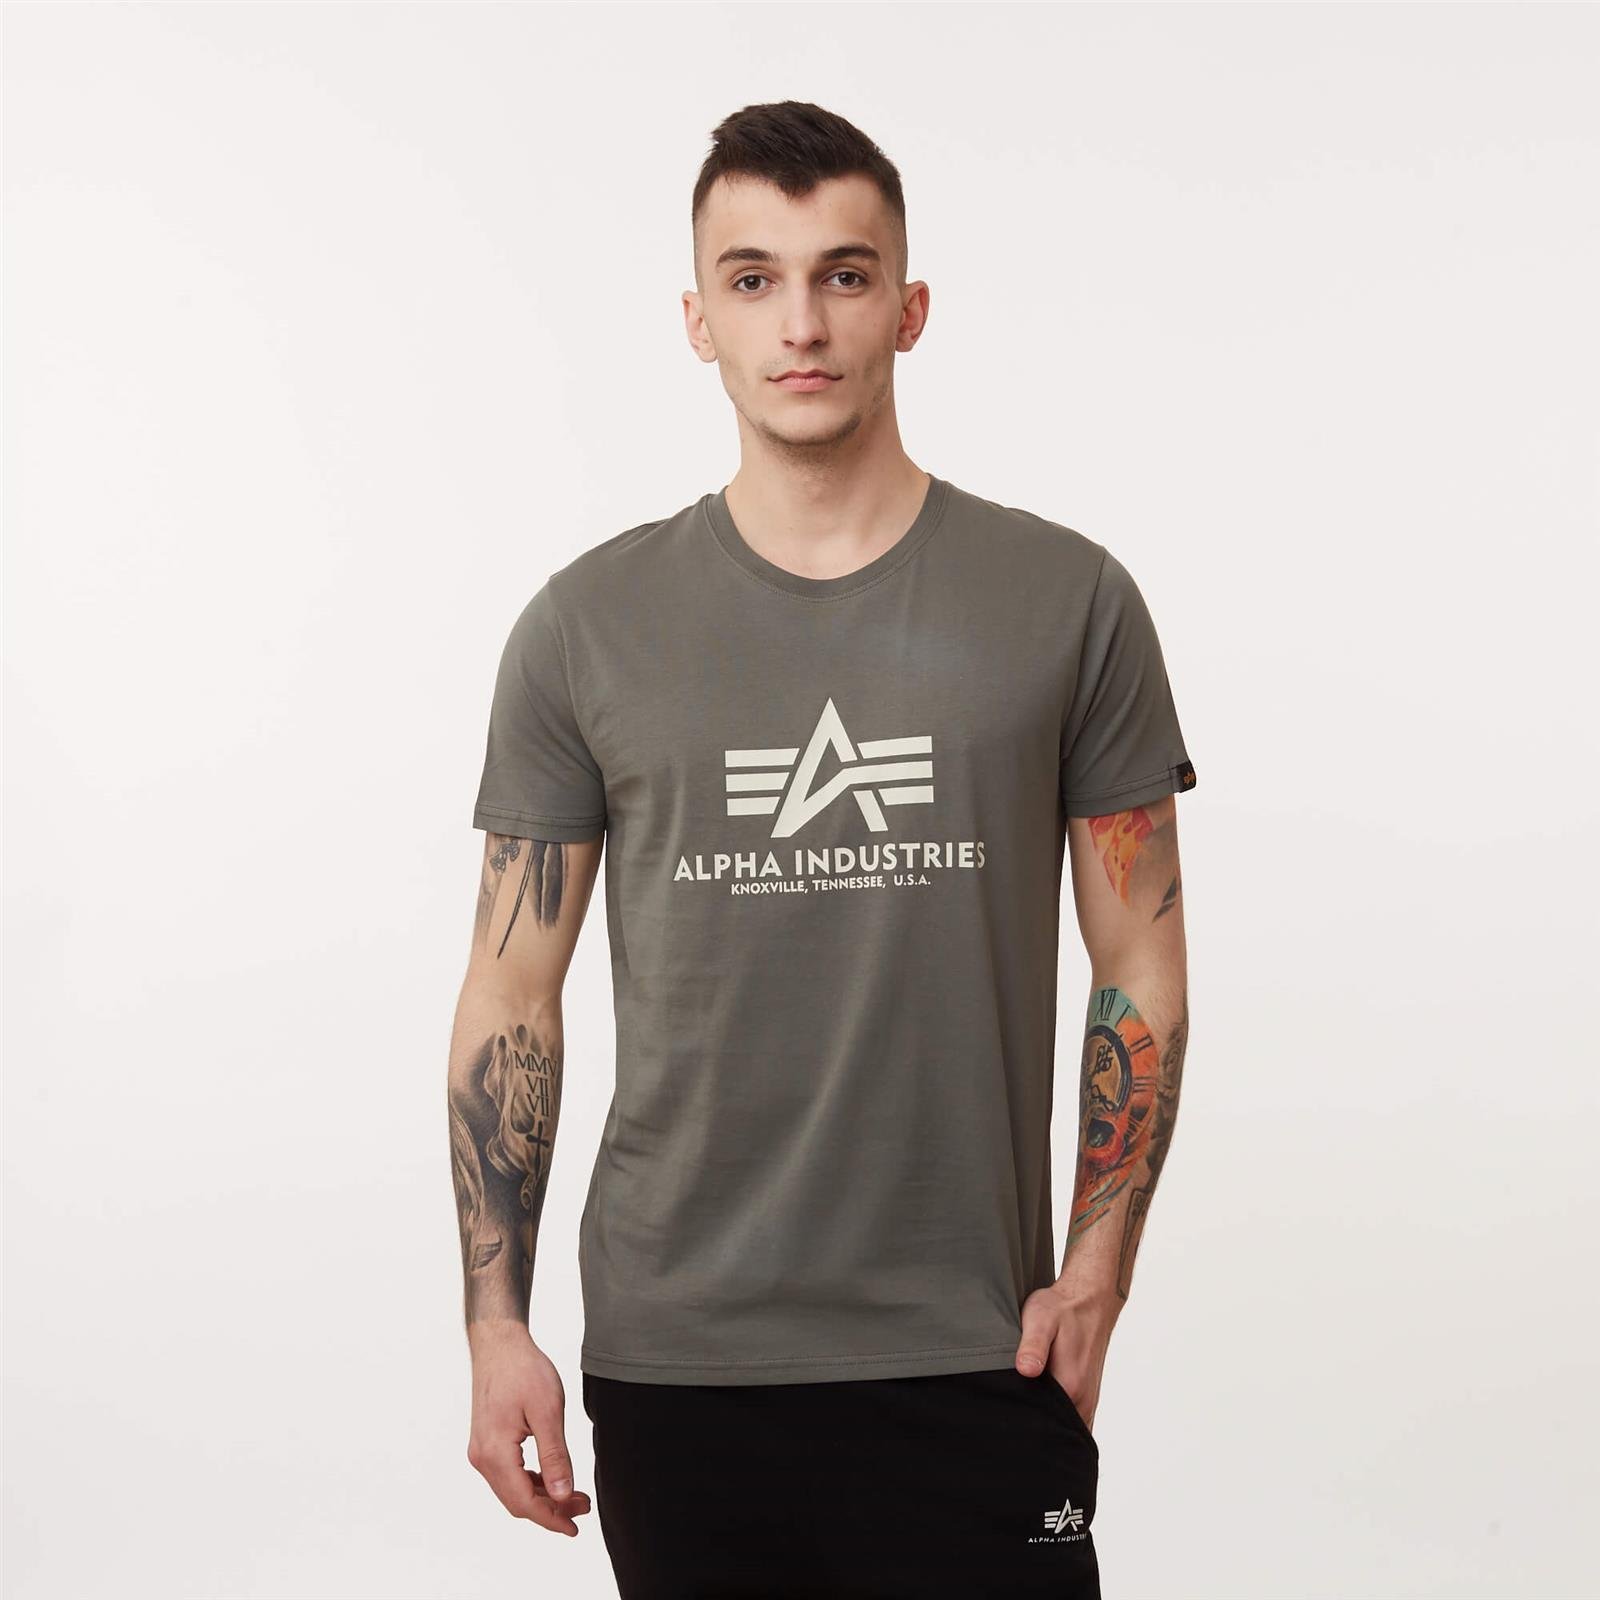 GREEN \\ clothing \\ \\ | brands #Recommended T-SHIRT Men Ellesse Brands #Brands \\ Men\'s clothing Alpha Alpha T-shirts \\ \\ BASIC Men Industries Industries VINTAGE